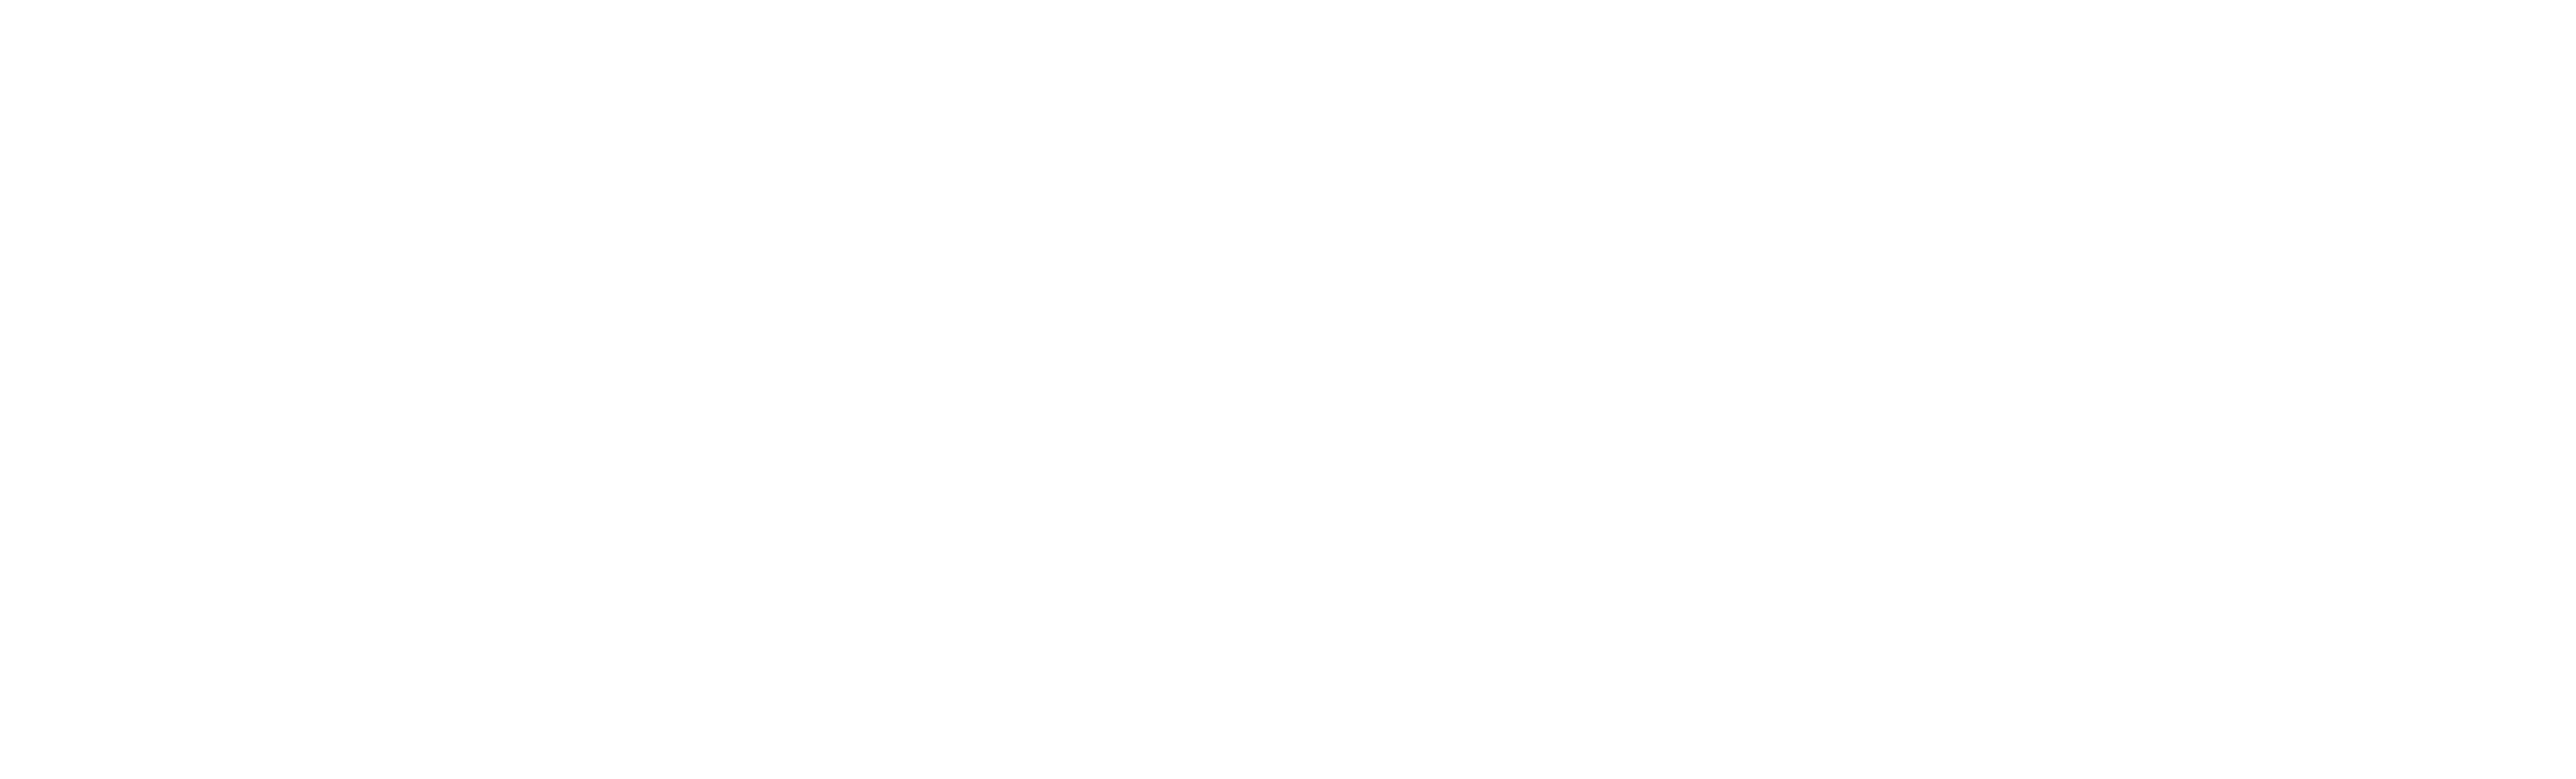 drone payload logo